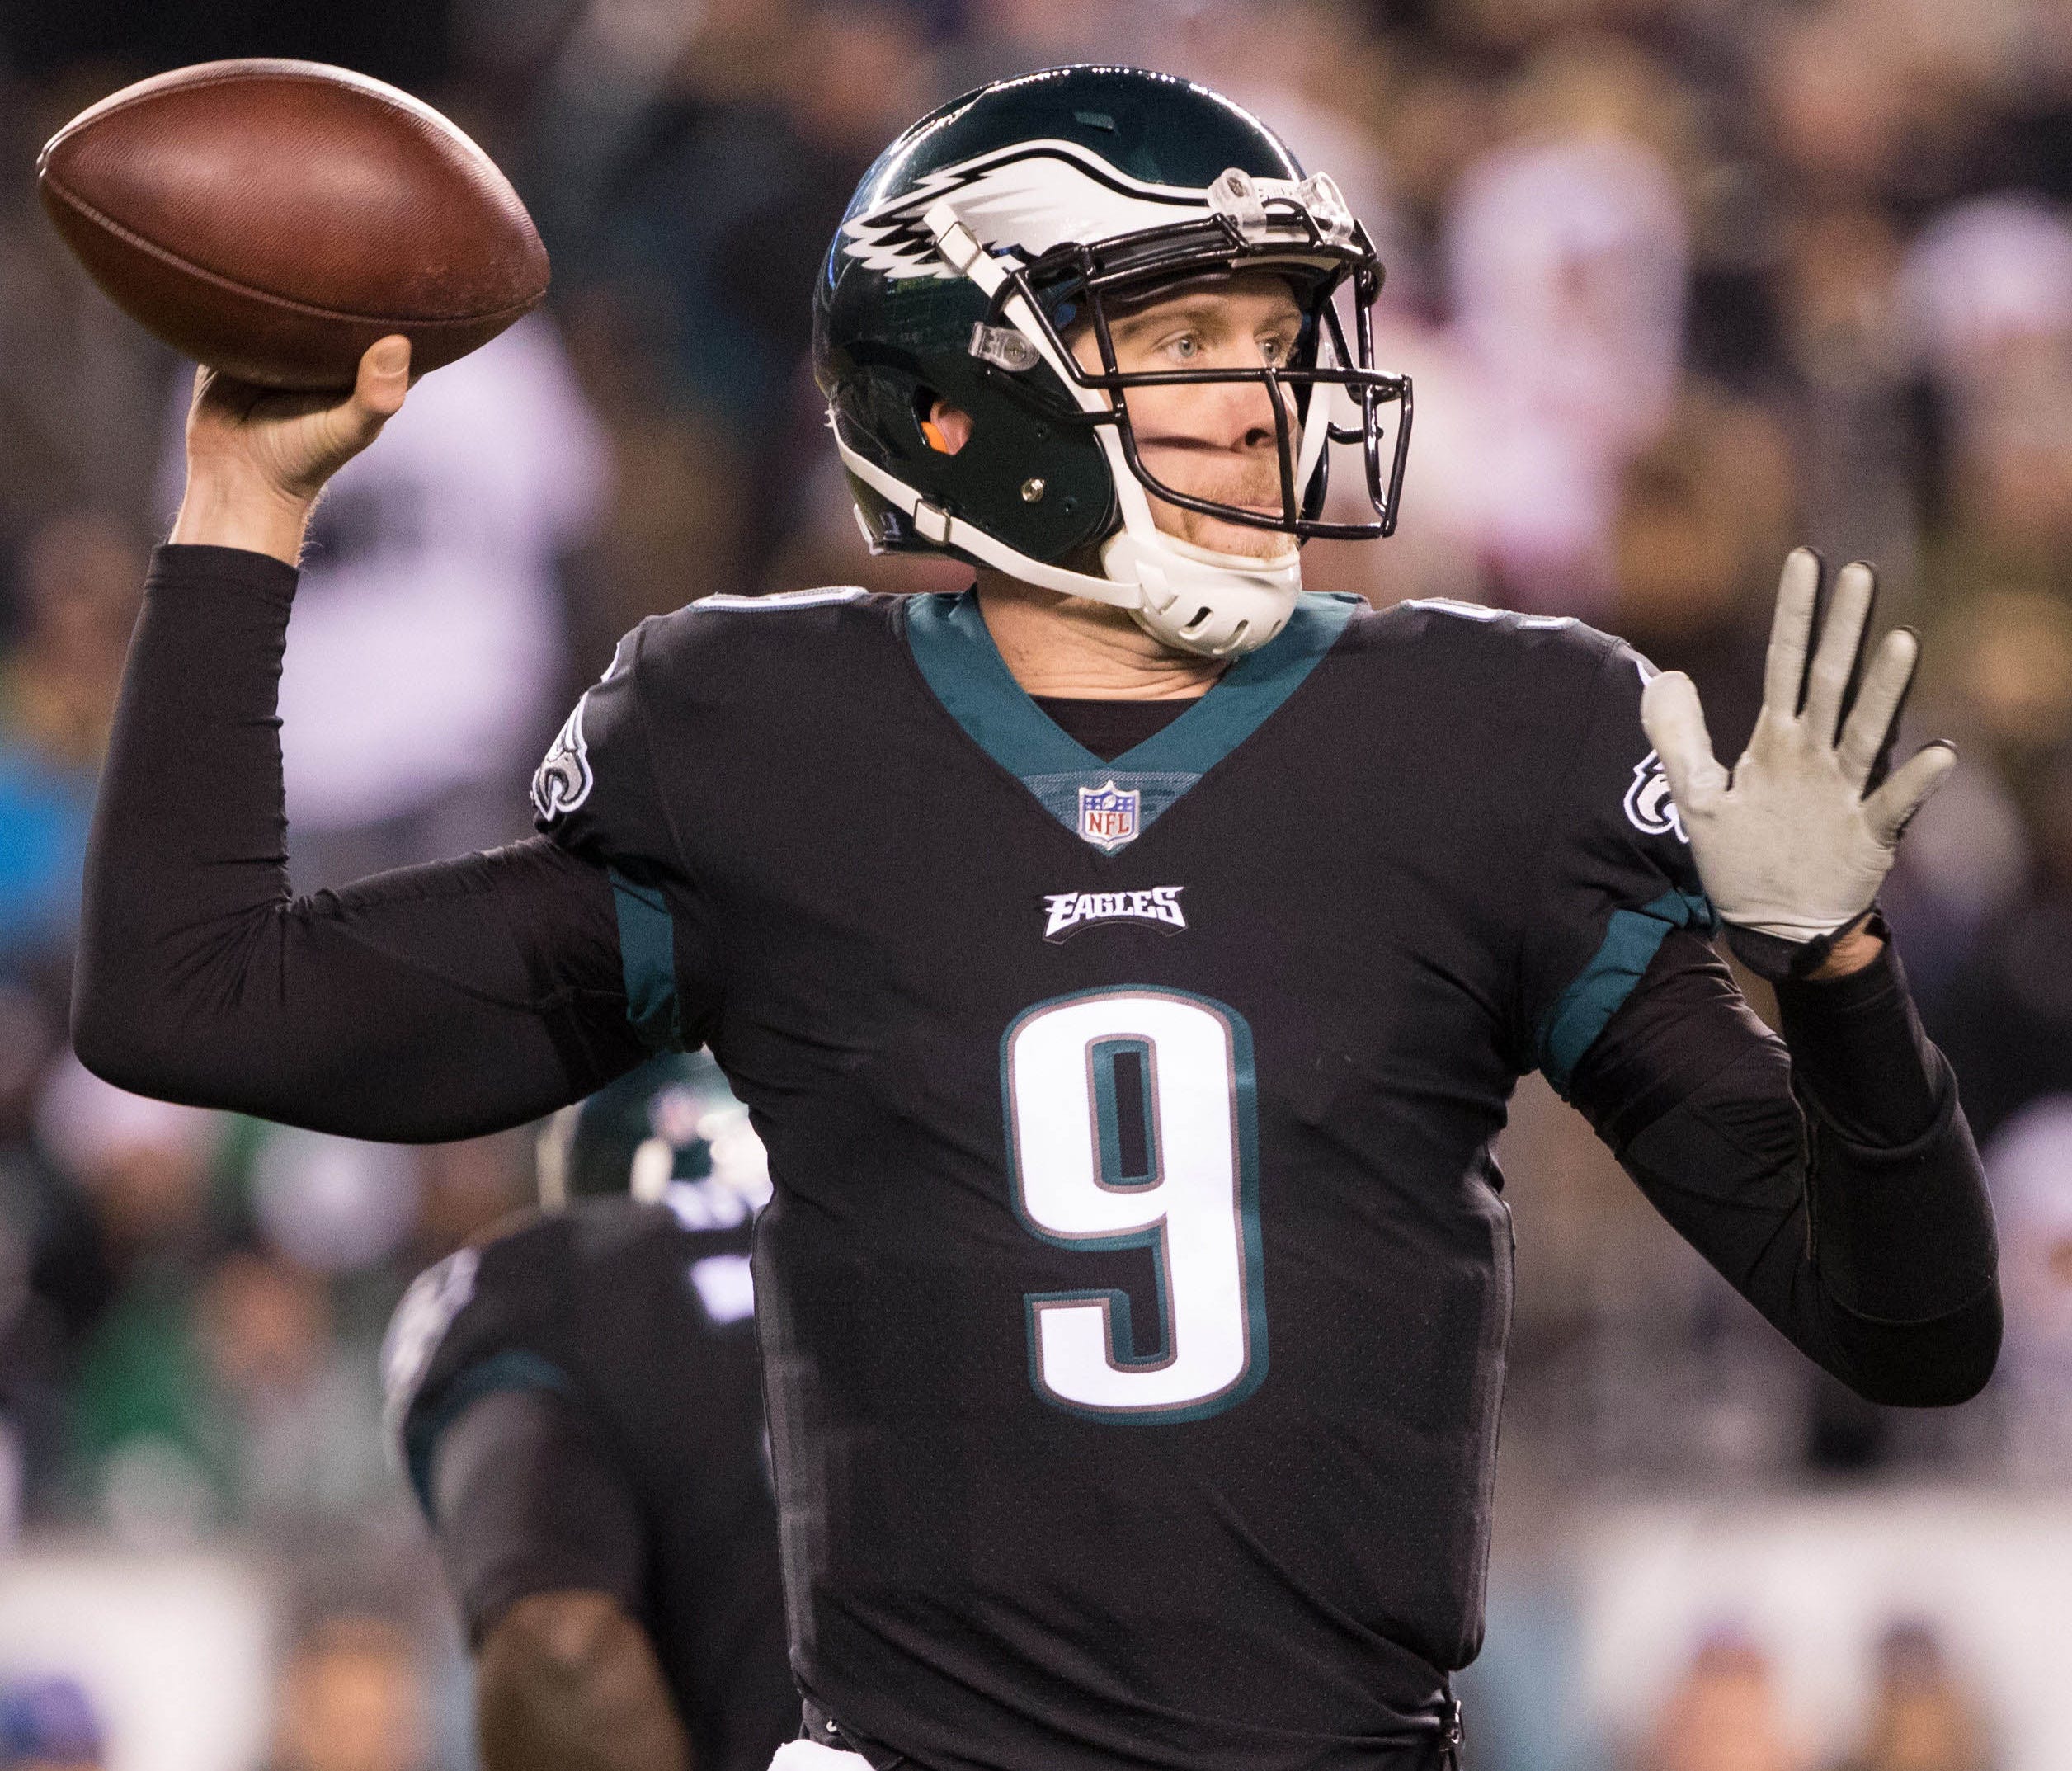 Eagles QB Nick Foles passed for 163 yards in Monday night's win.